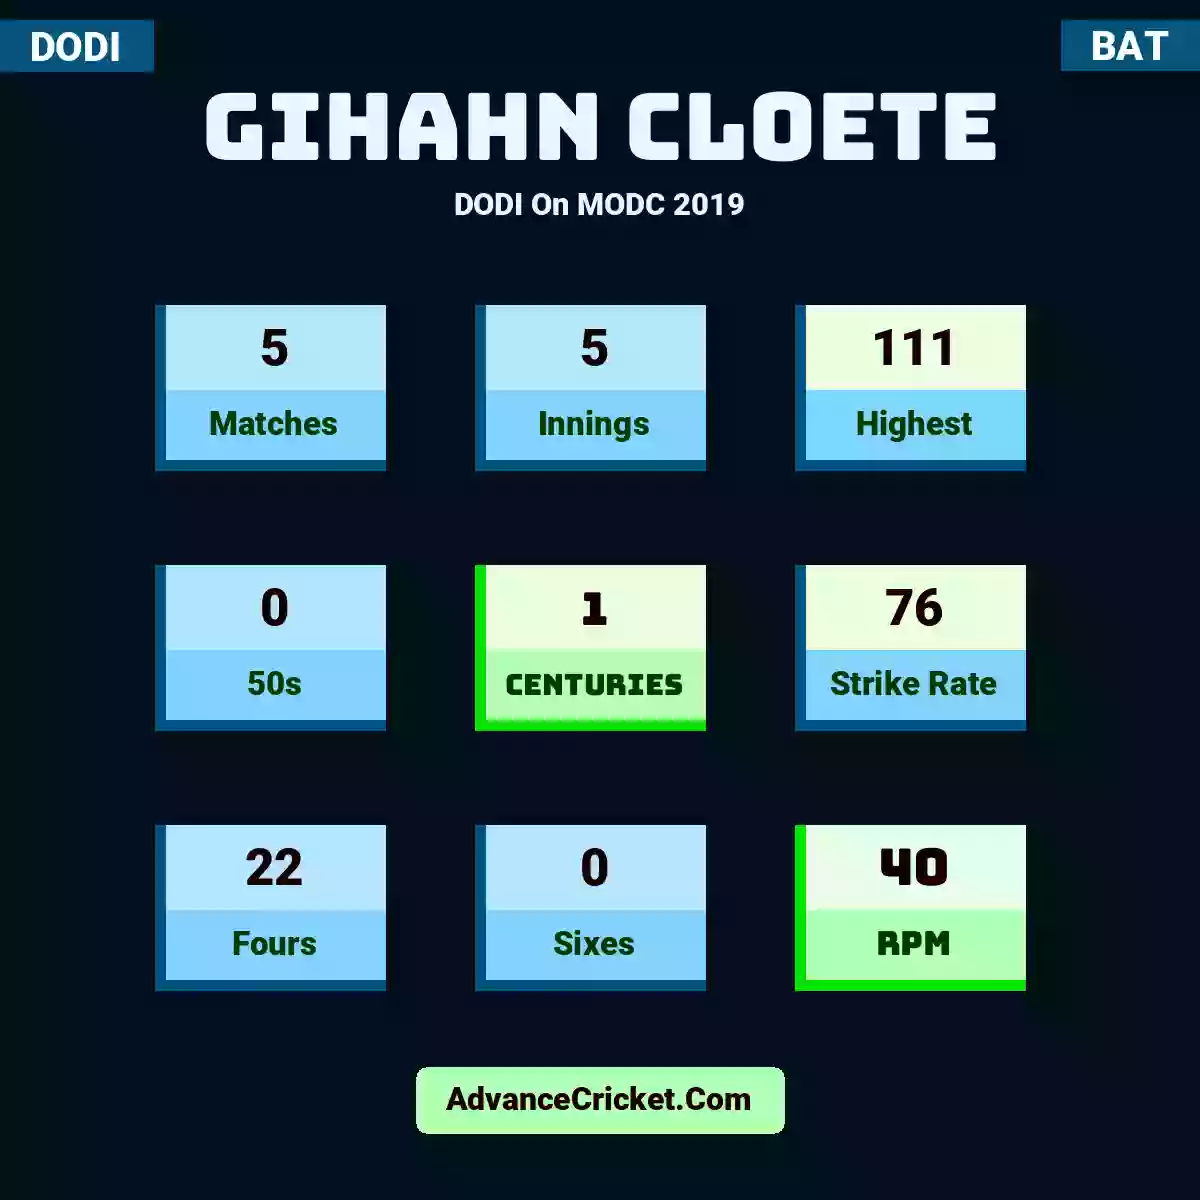 Gihahn Cloete DODI  On MODC 2019, Gihahn Cloete played 5 matches, scored 111 runs as highest, 0 half-centuries, and 1 centuries, with a strike rate of 76. G.Cloete hit 22 fours and 0 sixes, with an RPM of 40.